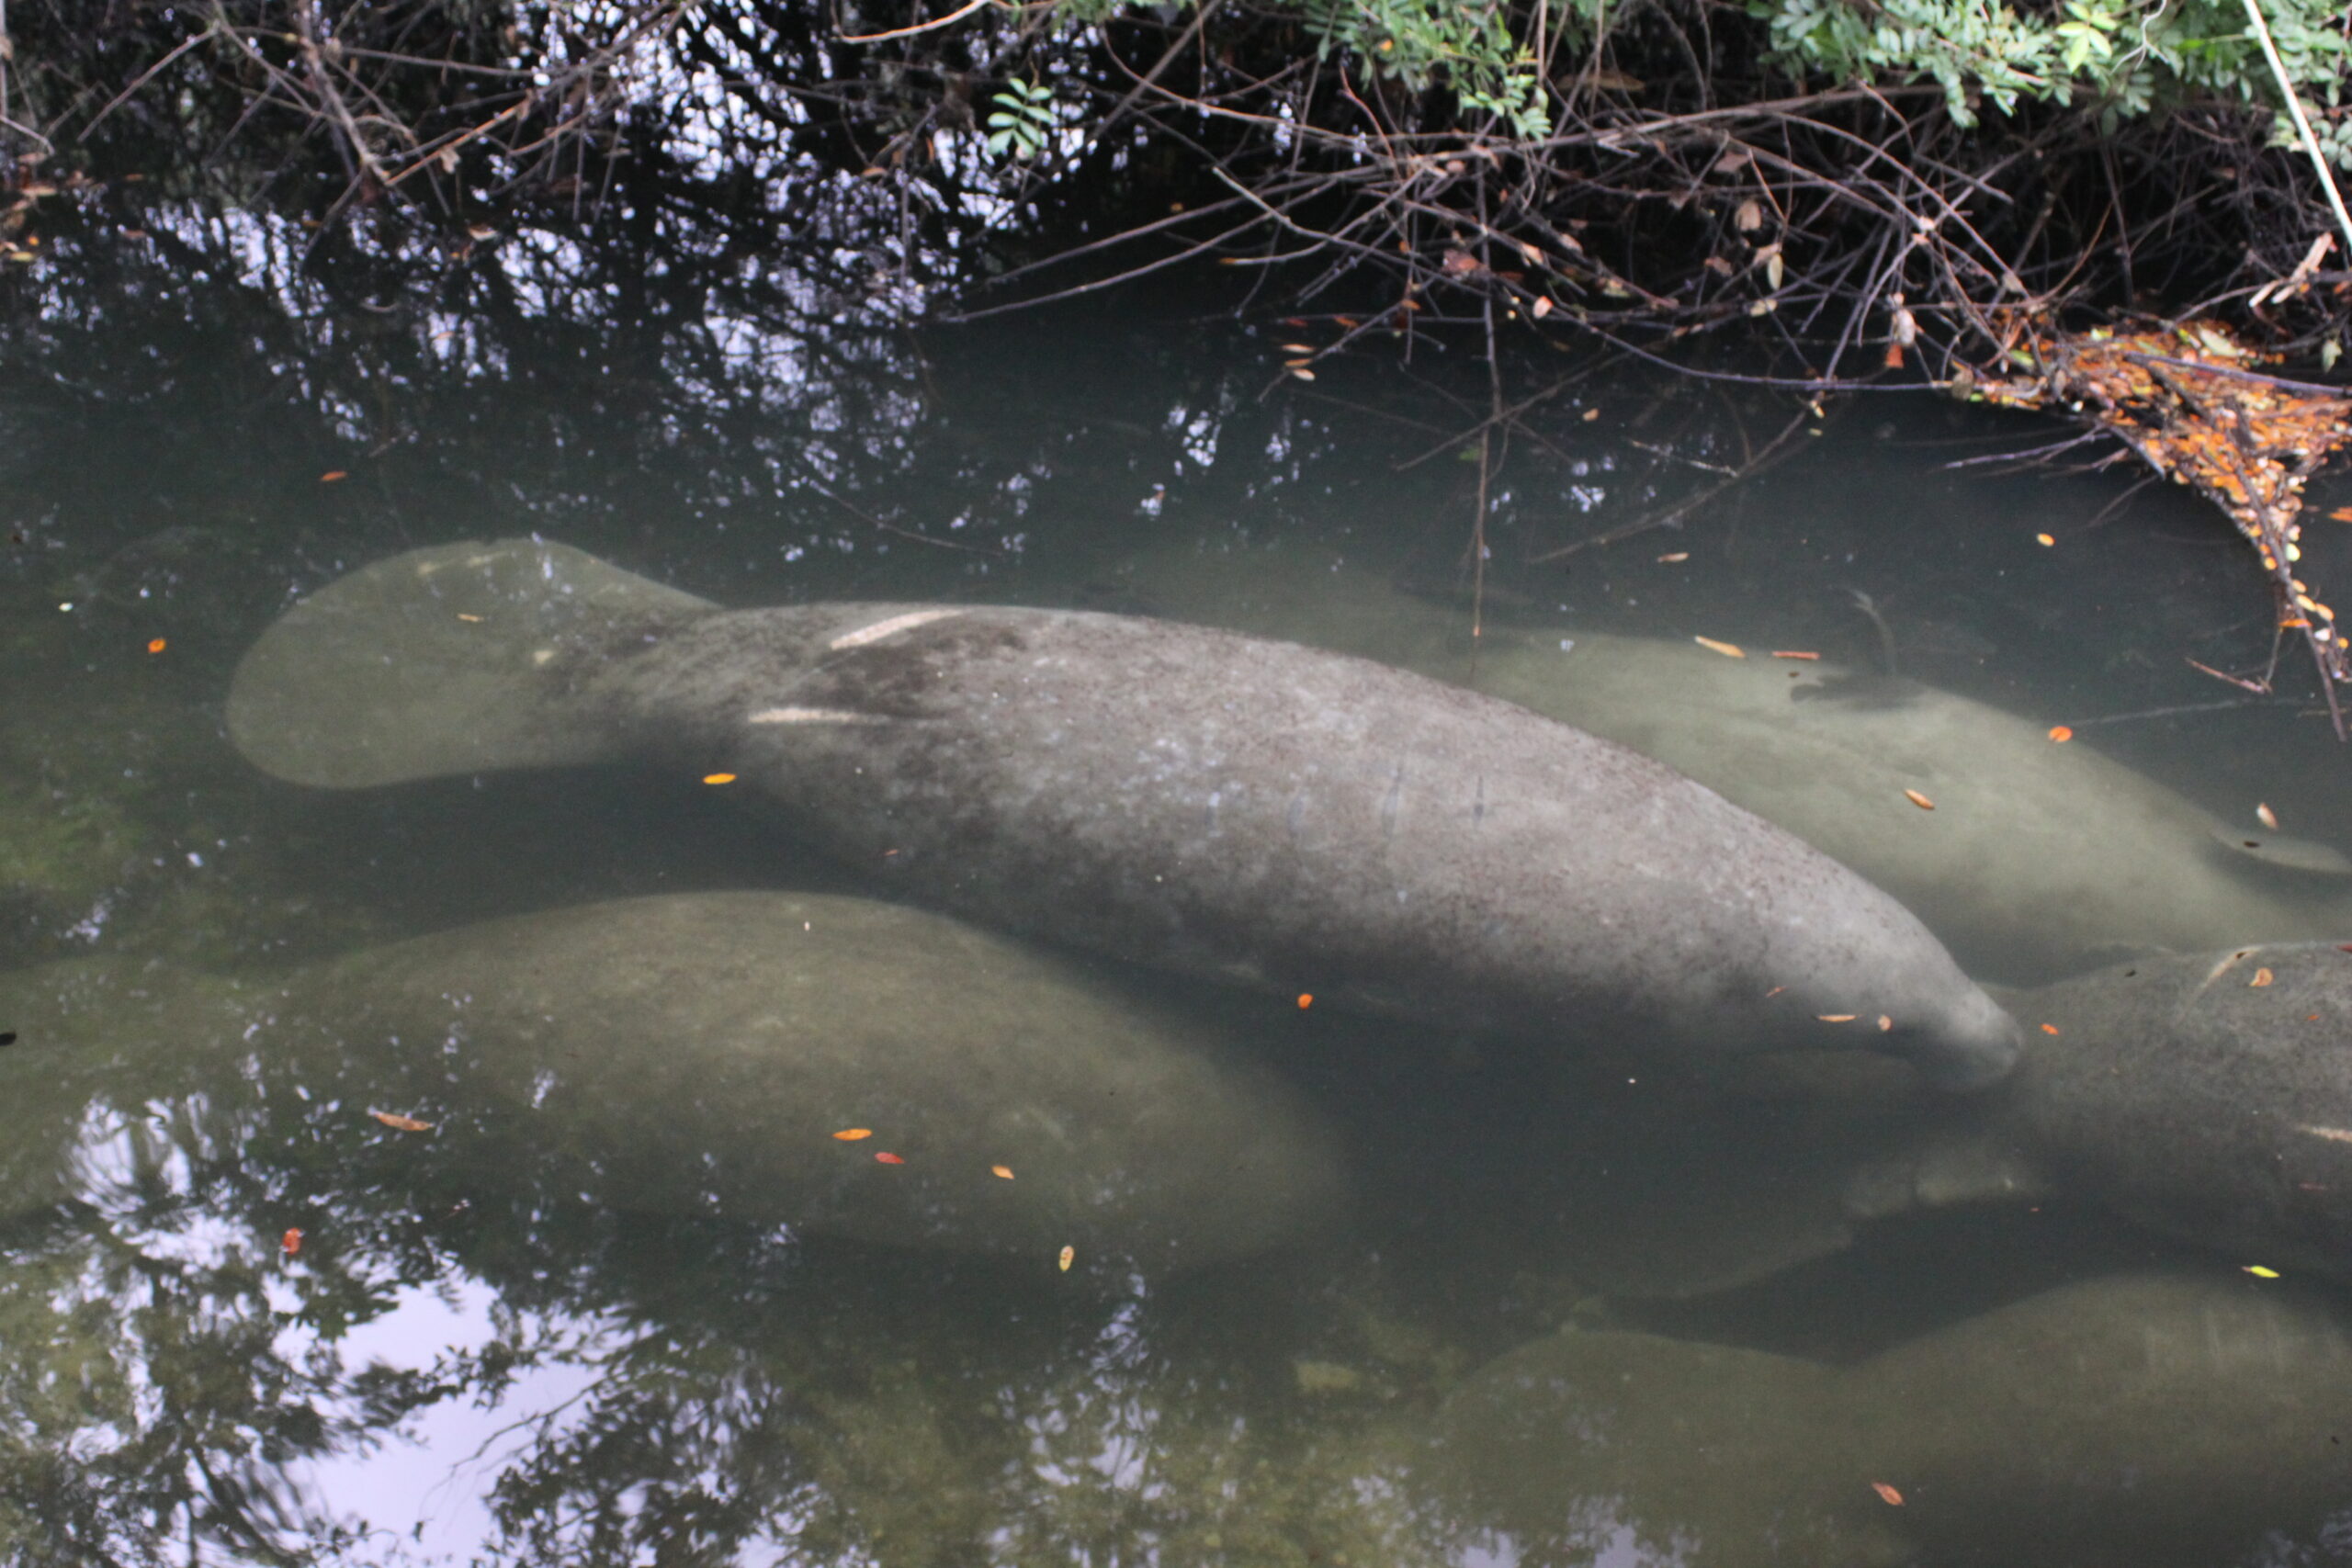 A group of manatees can be seen underwater.